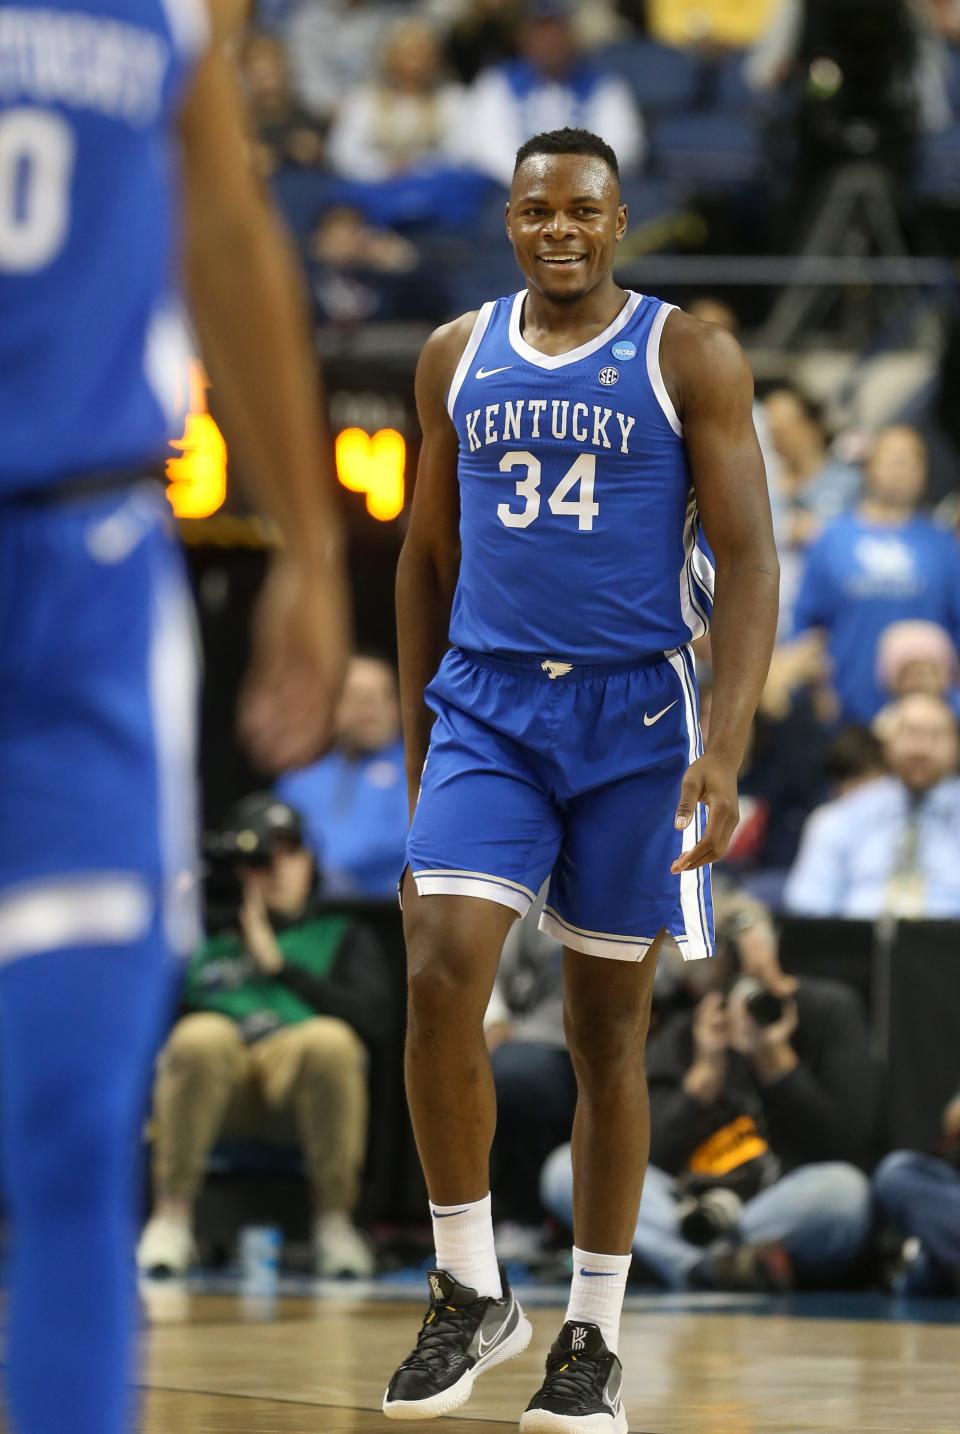 Kentucky’s Oscar Tshiebwe celebrates scoring against Kansas State in the second round of the NCAA Tournament.March 19, 2023